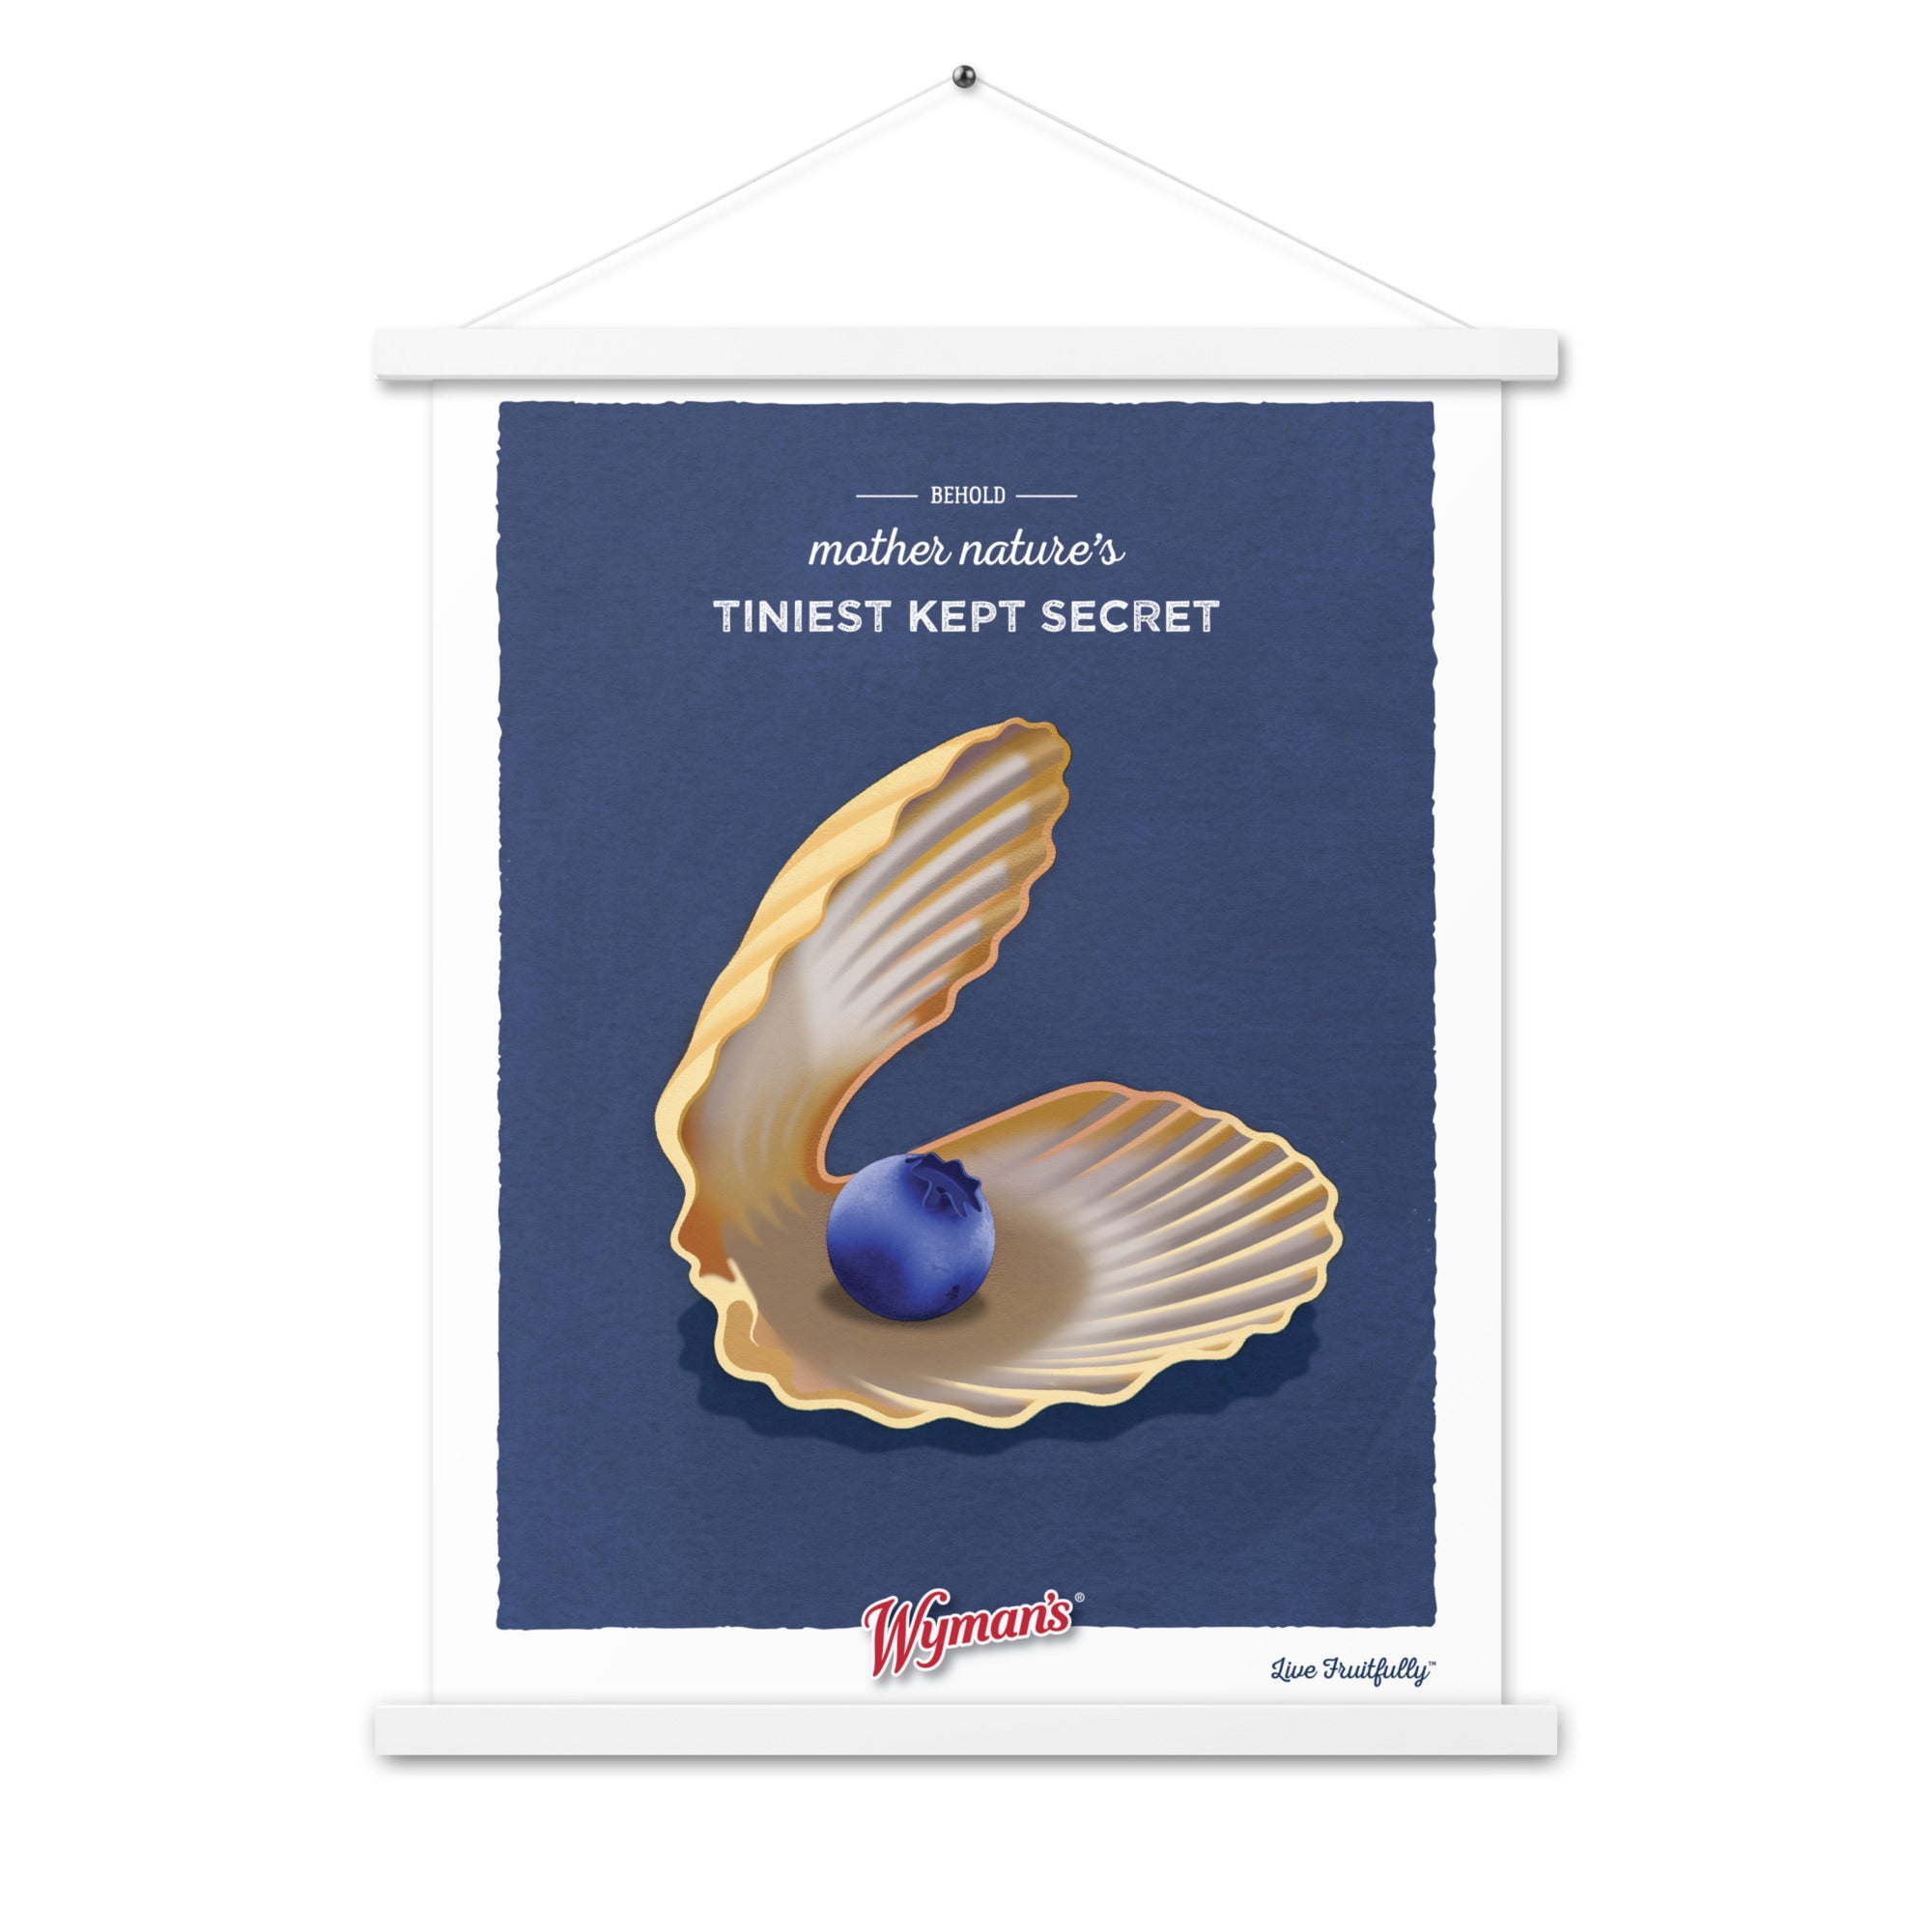 A Behold Mother Nature's Tiniest Kept Secret Poster with a blue shell design, created using advanced printing techniques, hanging on the wall. Created by Shop Wyman's.